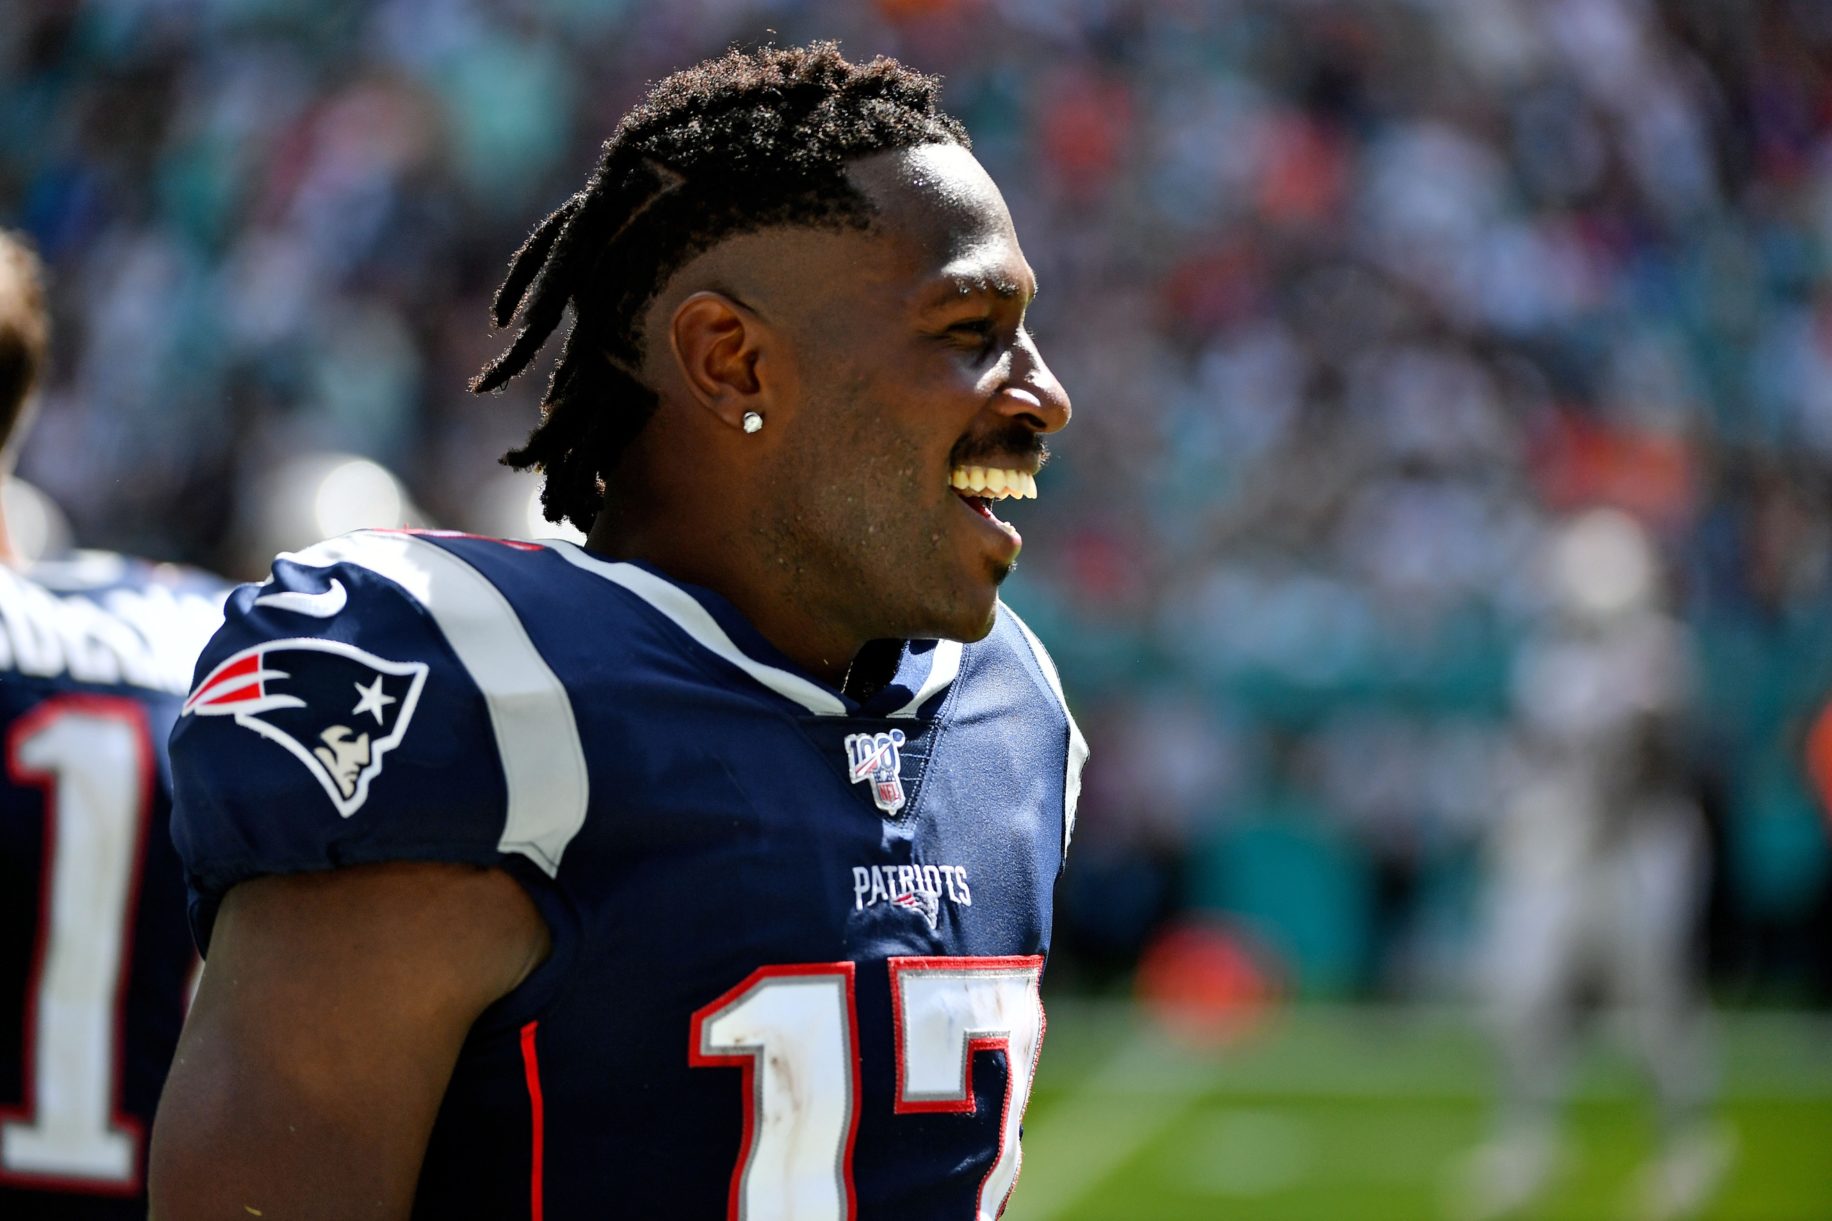 Patriots Release Antonio Brown Amid Rape Allegations and Texting Accuser, Provide No Reason Why